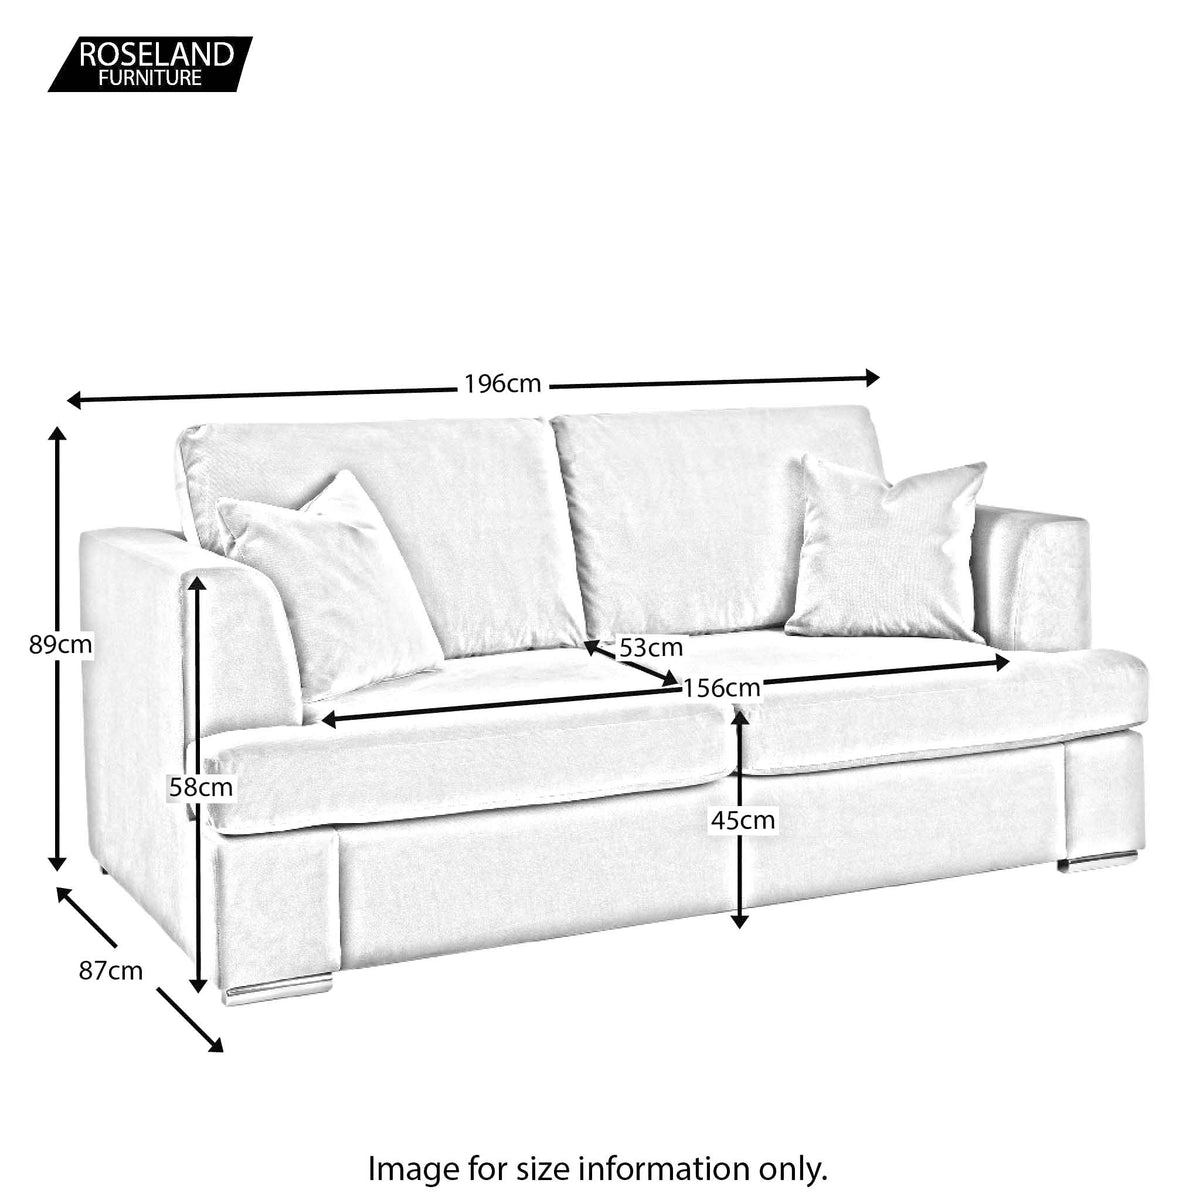 Felice 3 Seater Sofa - Size Guide